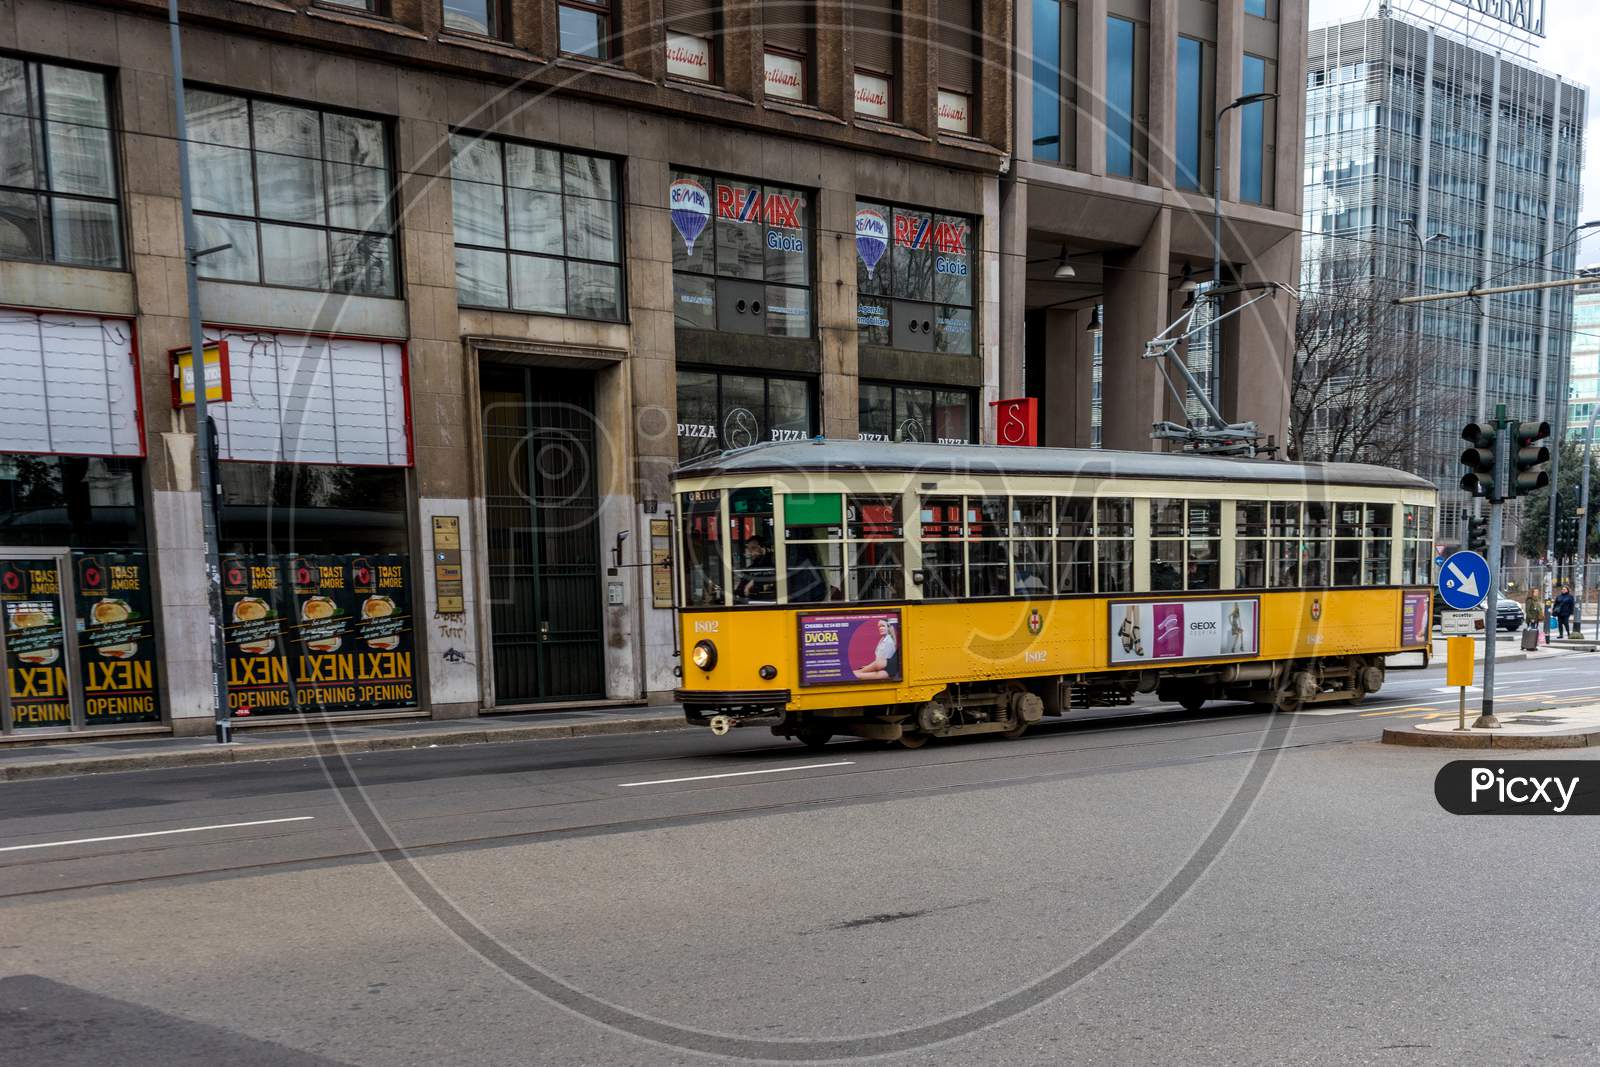 Milan - March 31: An Old Classic Yellow Tram Passes By The Street On March 31, 2018 In Milan, Italy.